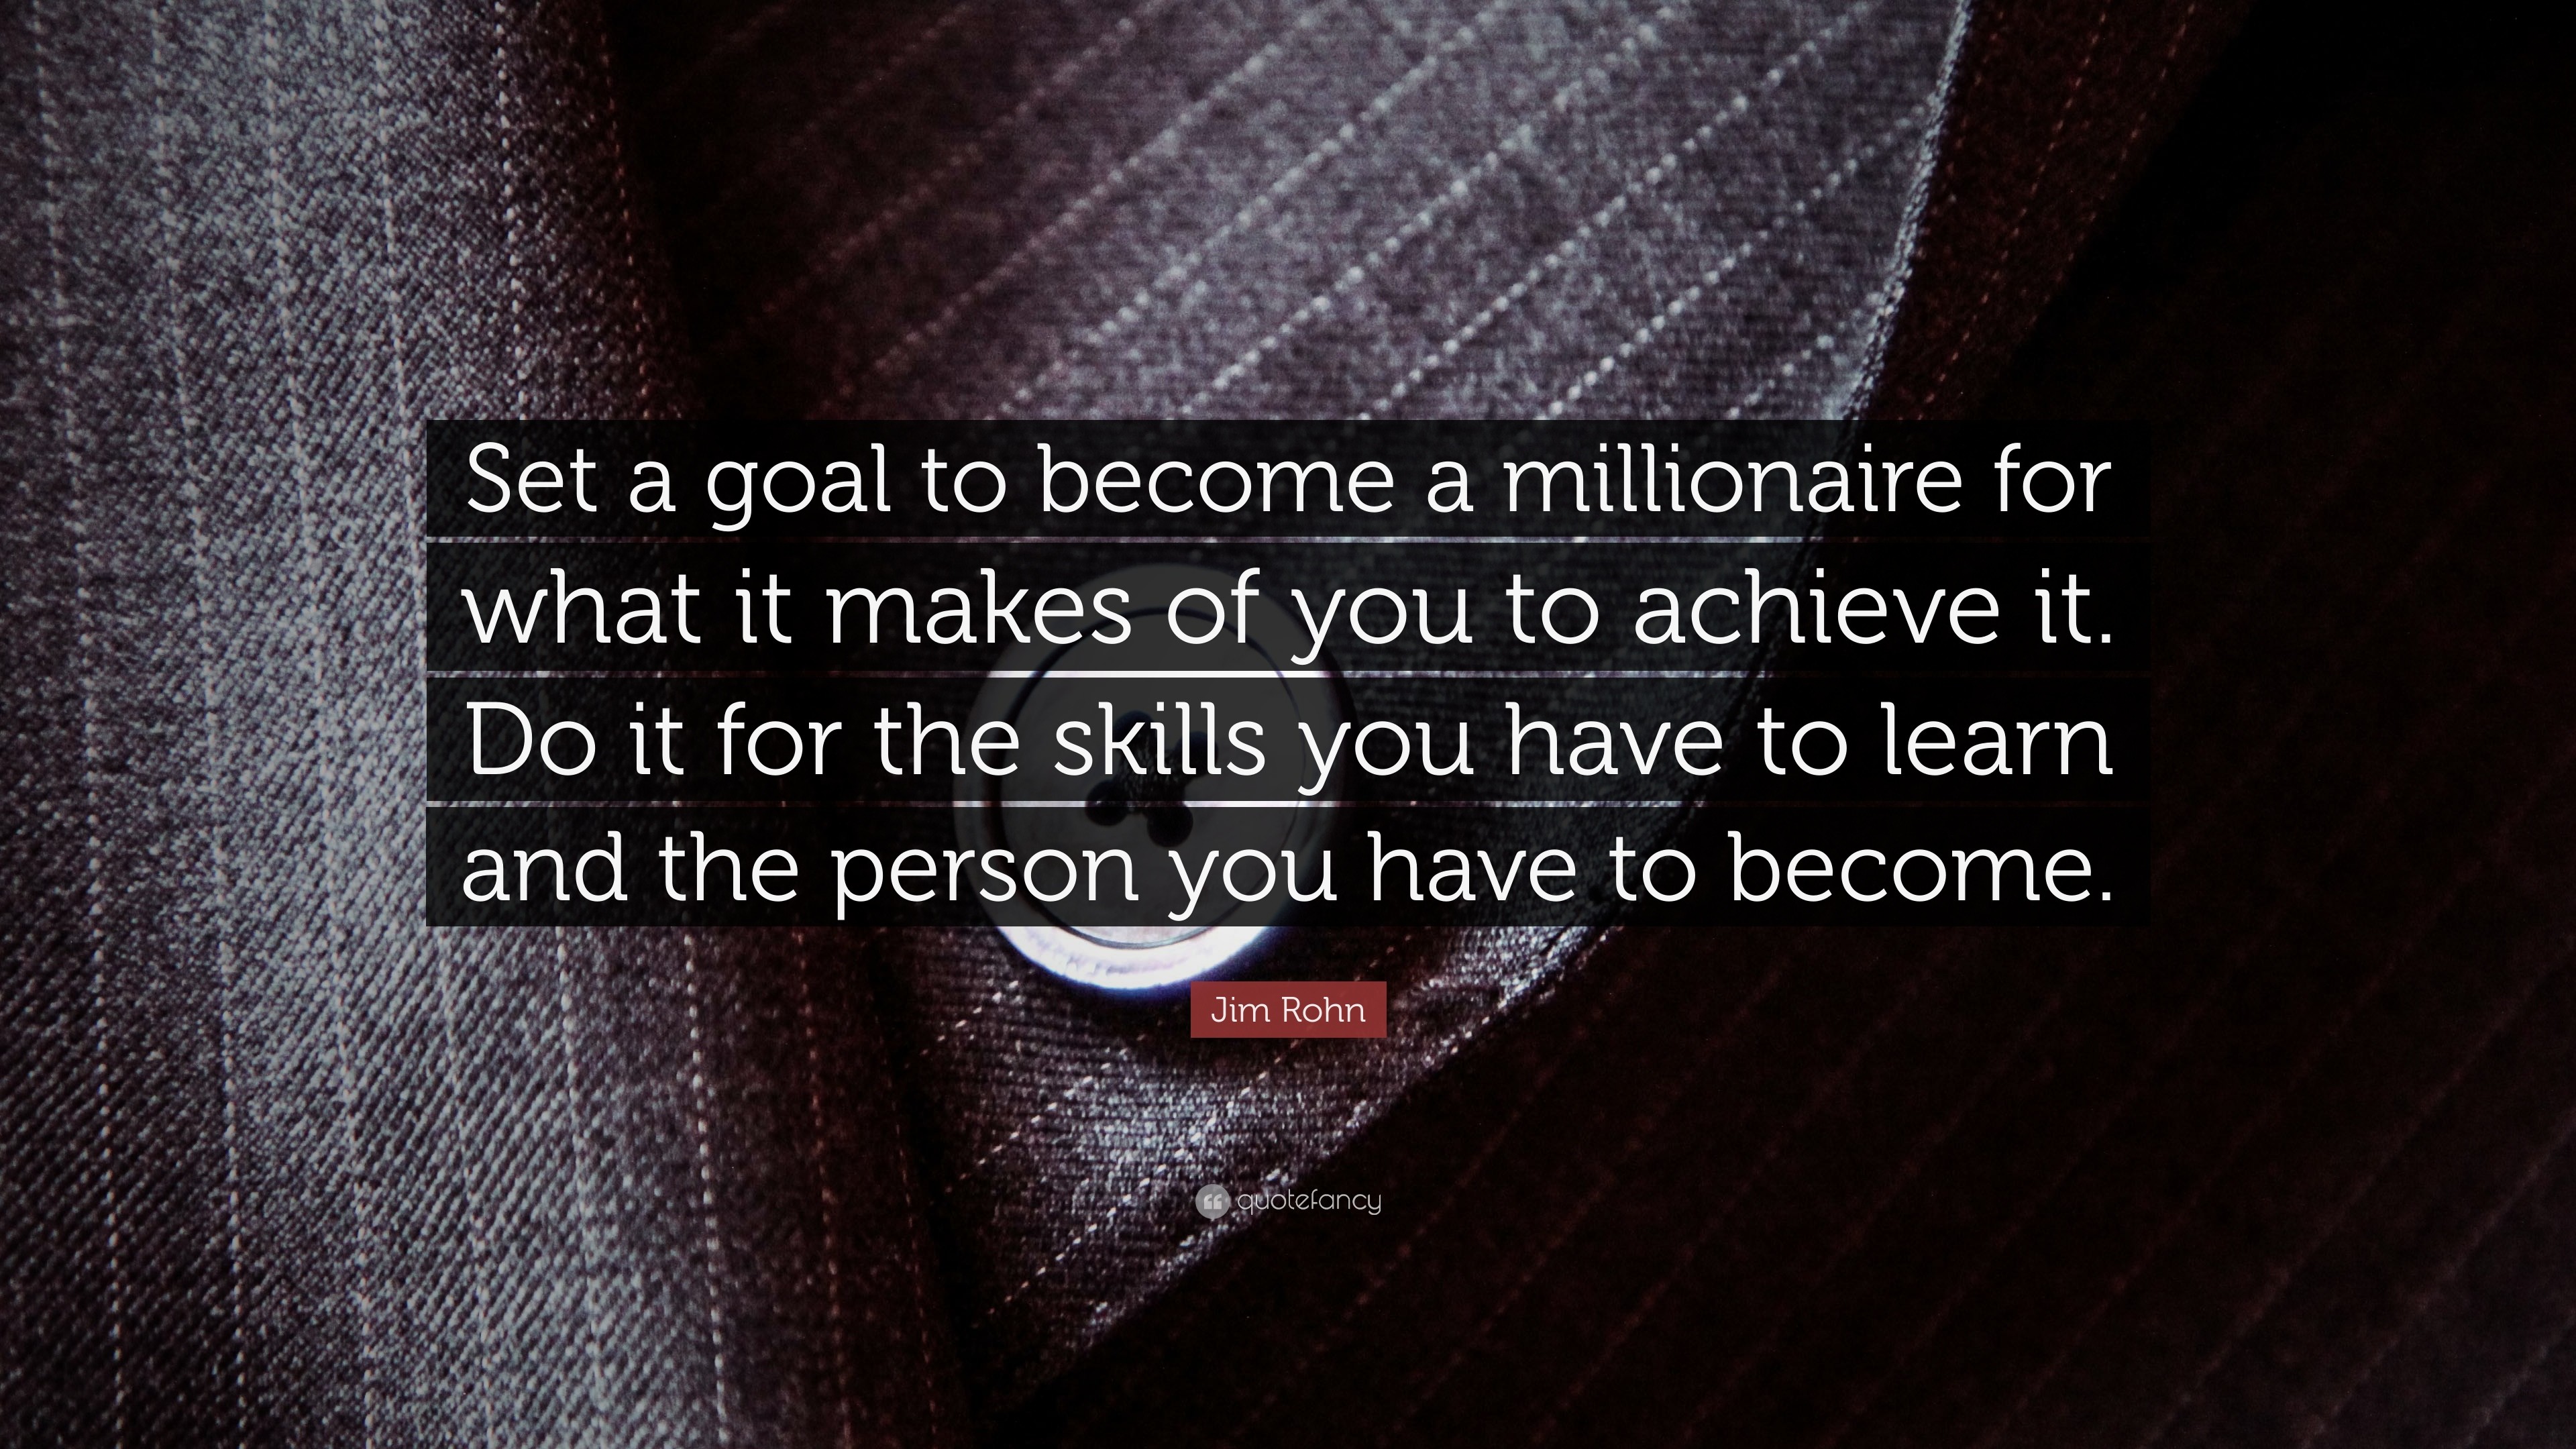 3840x2160 Goal Quotes: “Set a goal to become a millionaire for what it makes of